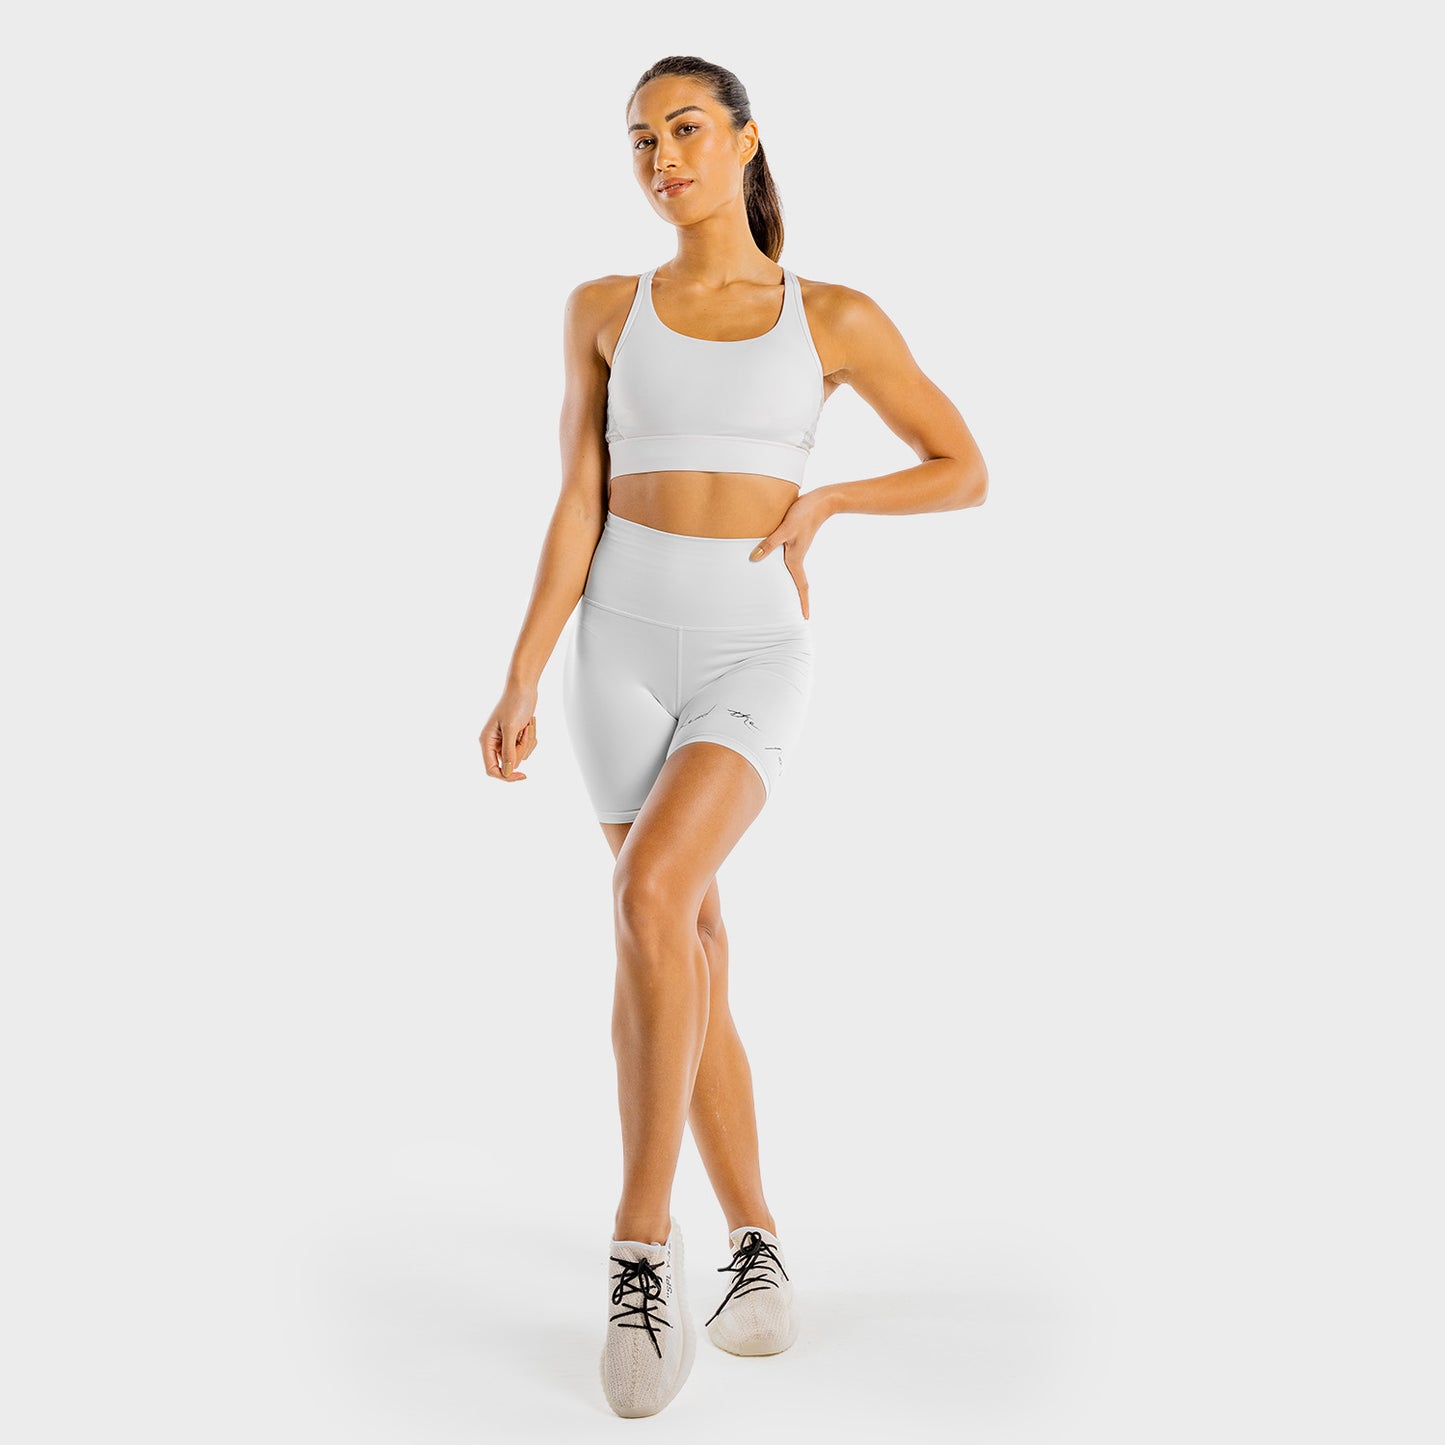 squatwolf-shorts-for-women-vibe-cycling-shorts-white-workout-clothes